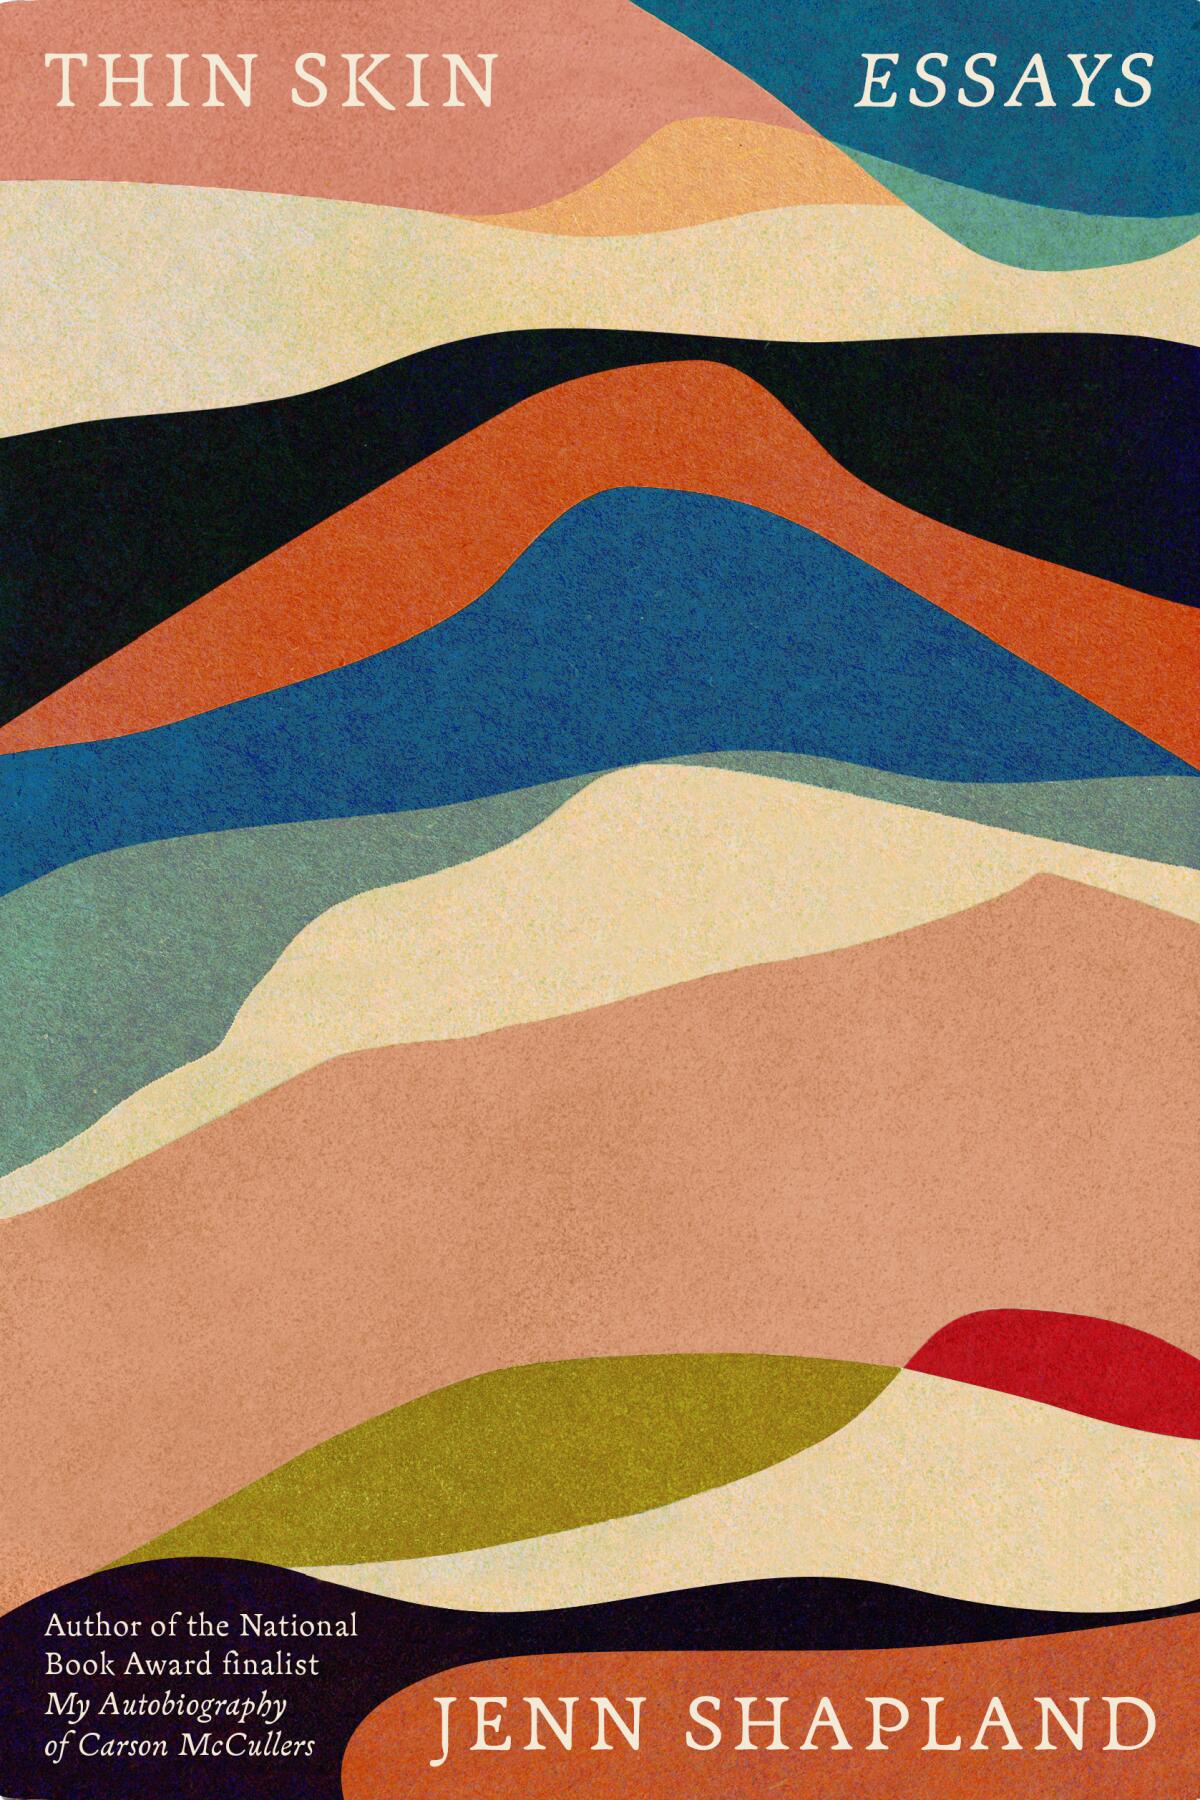 The cover of "Thin Skin: Essays" by Jenn Shapland, featuring an abstract, multicolored design.